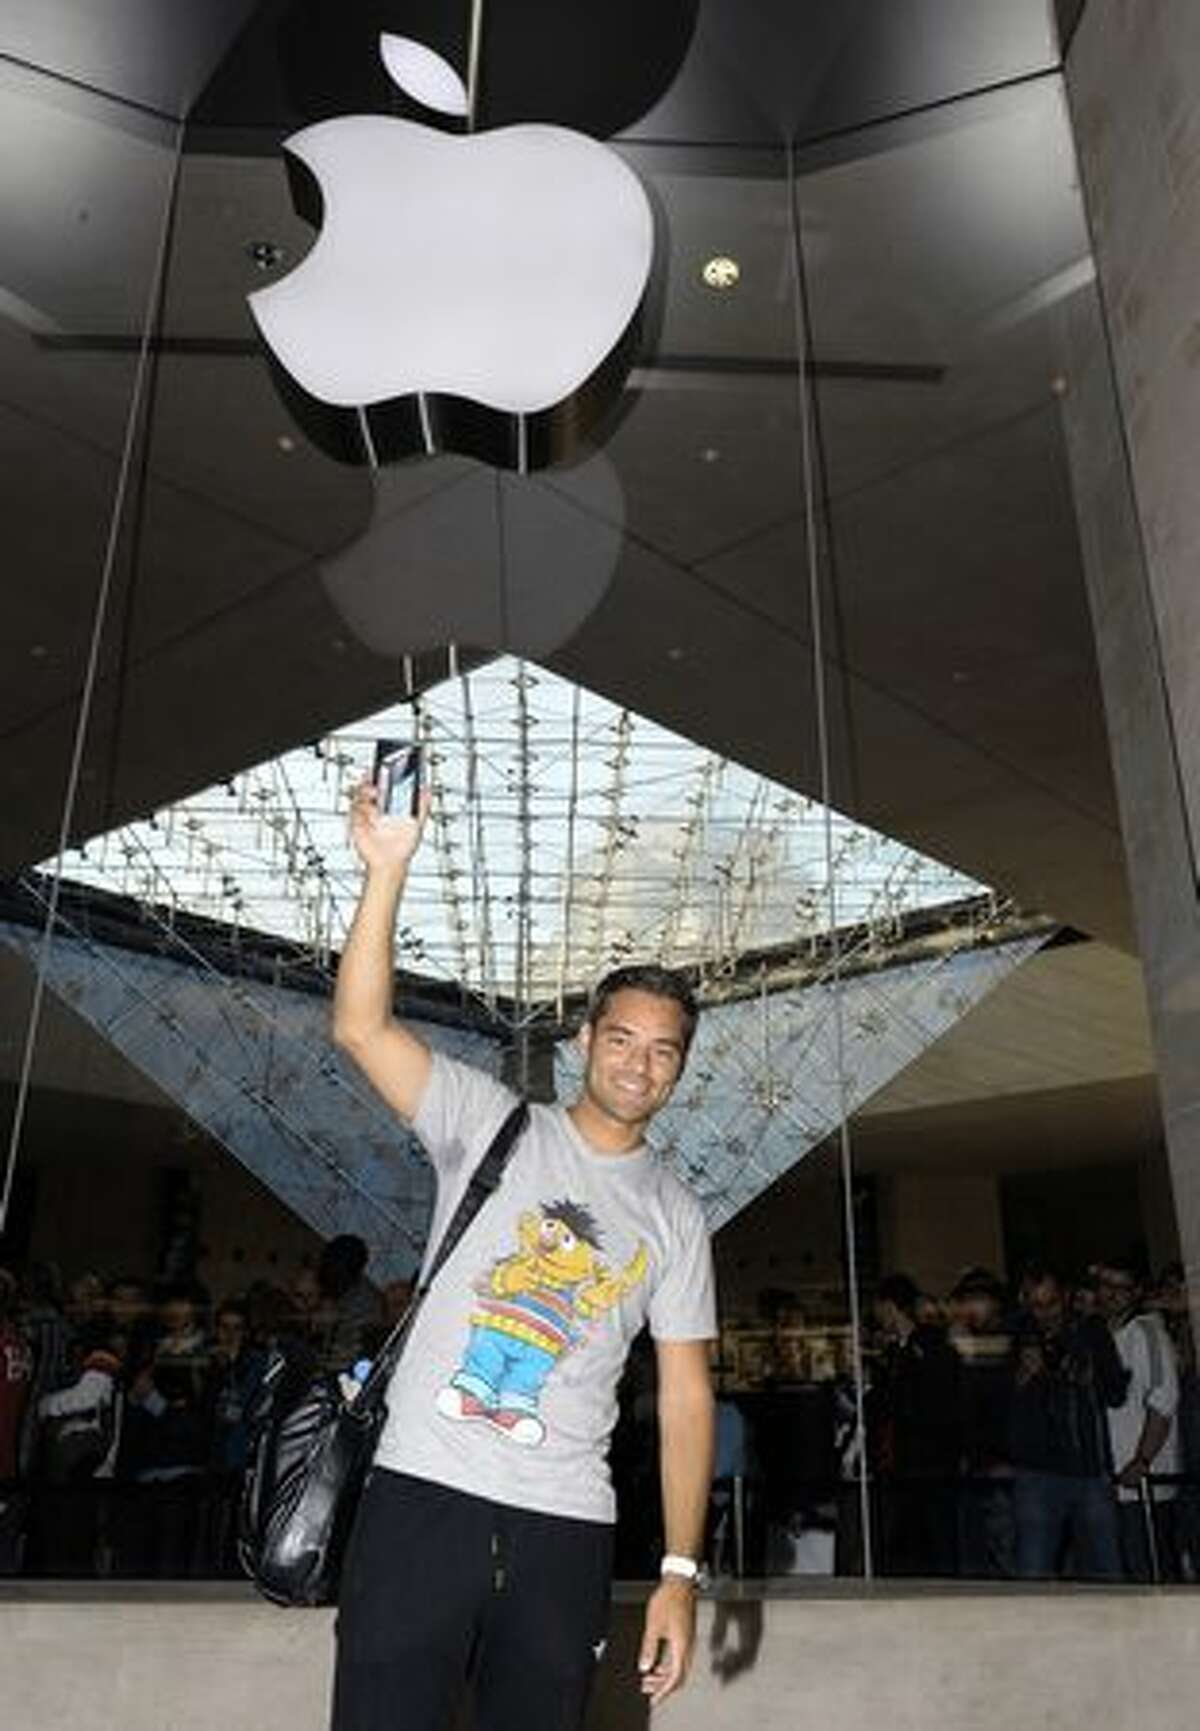 Maurice holds his new iPhone 4 in front of a mobile-phone store at the Carrousel du Louvre shopping mall in Paris on June 24, 2010.